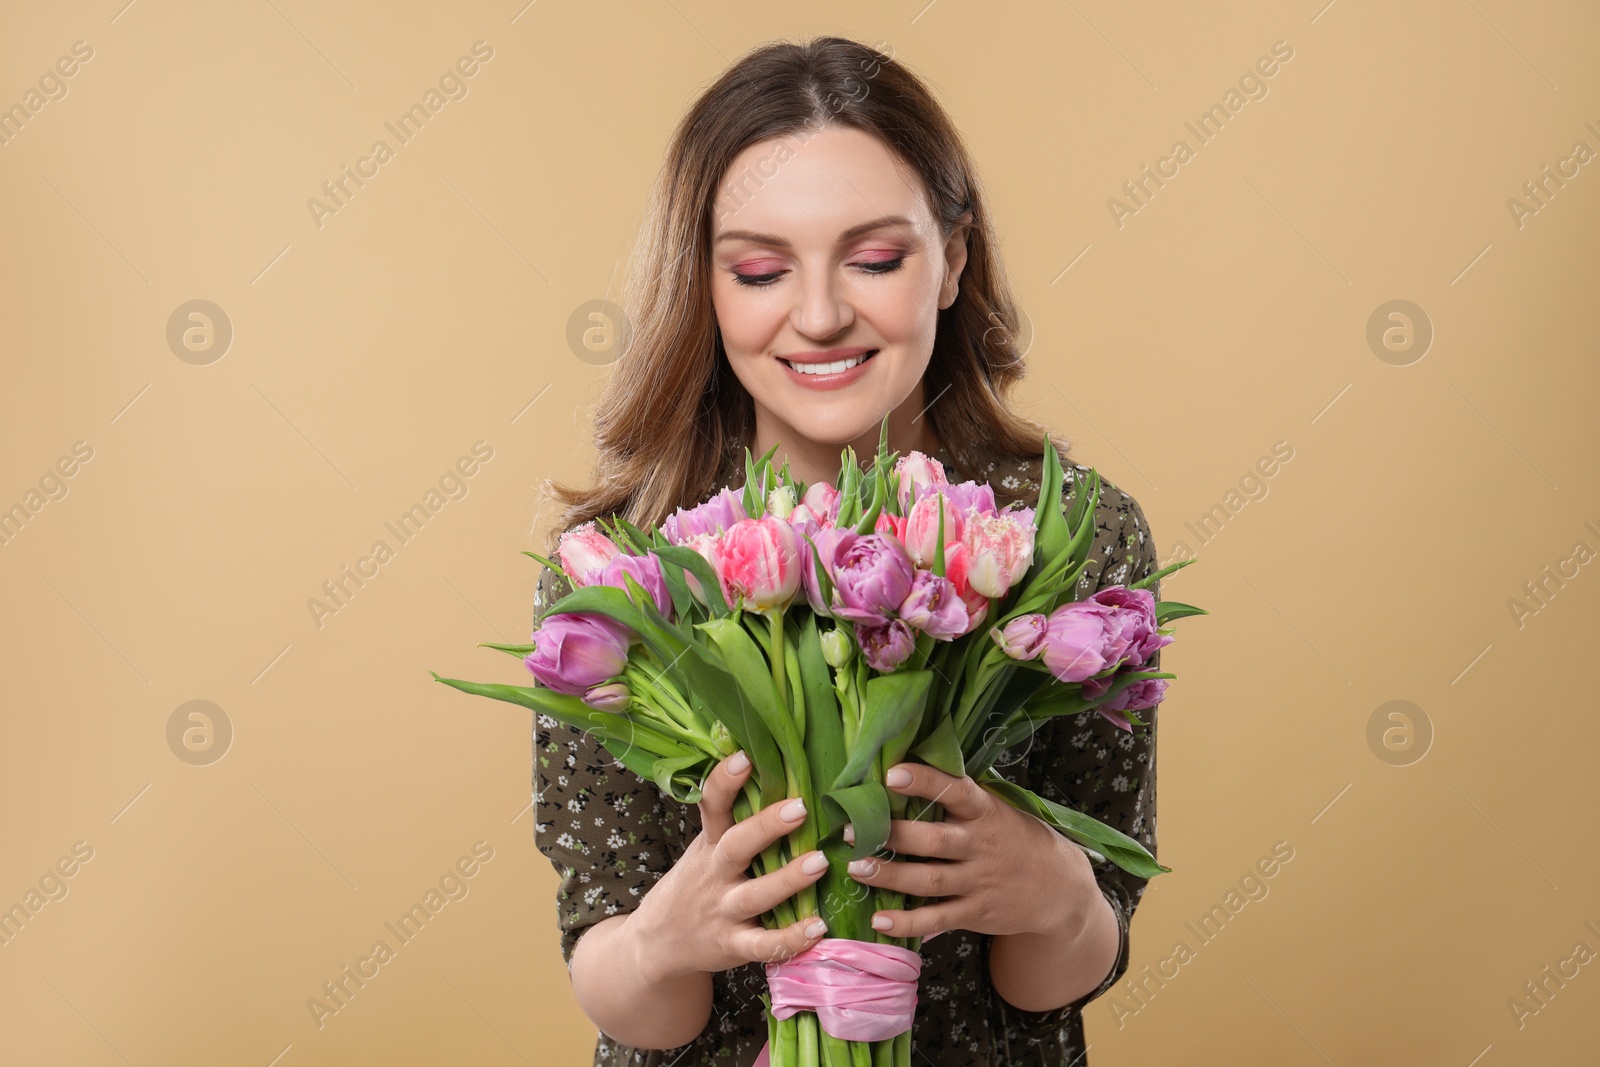 Photo of Happy young woman holding bouquet of beautiful tulips on beige background